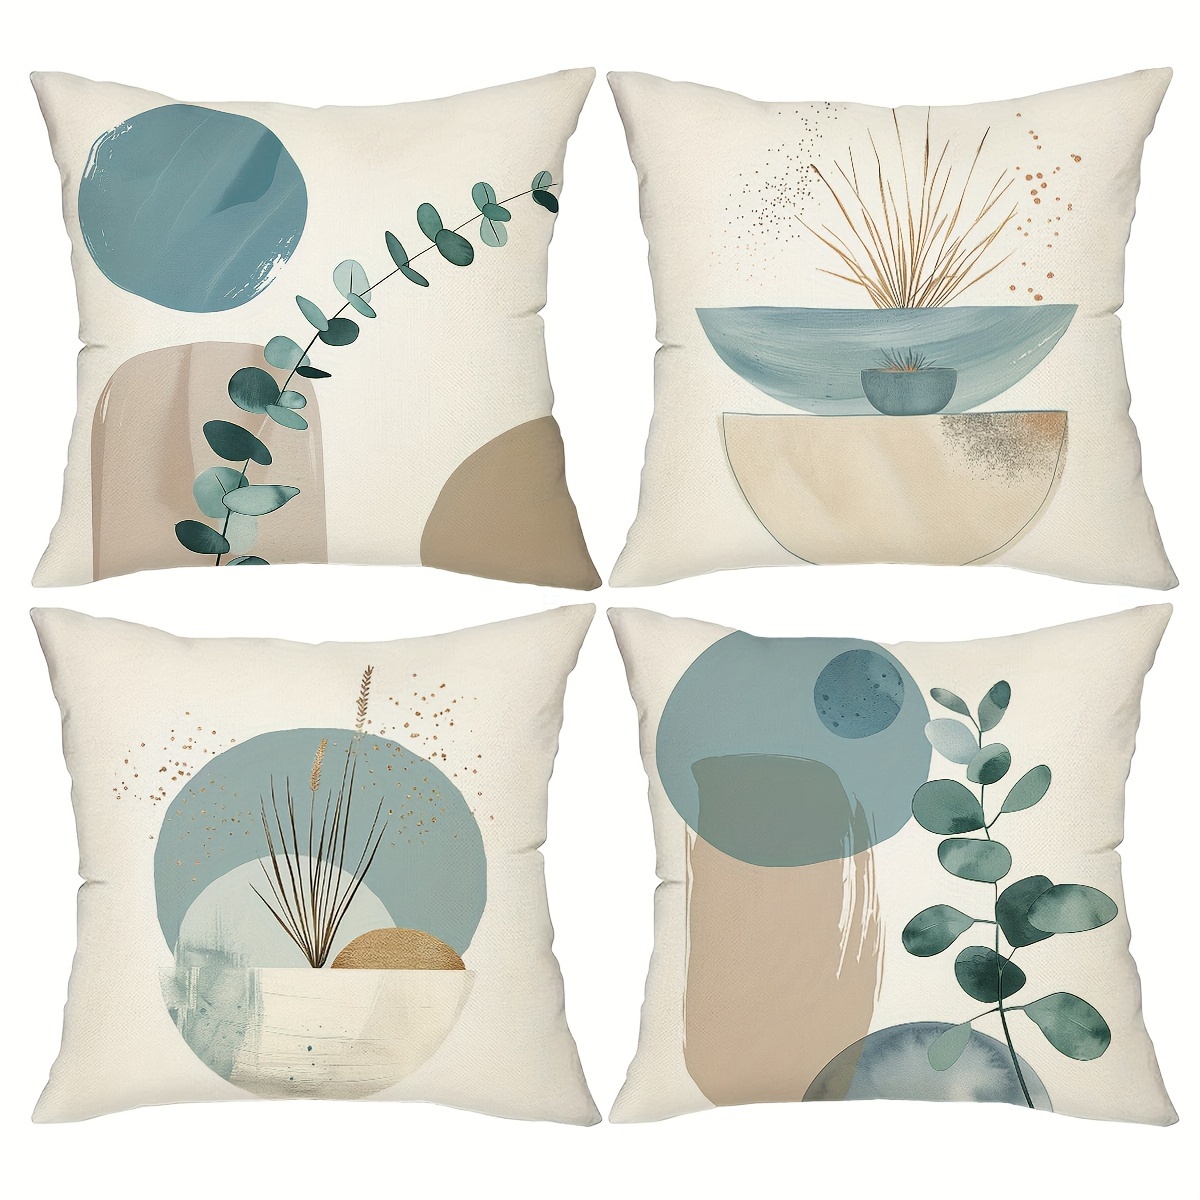 

4pcs, Boho Abstract Plant Geometry Throw Pillow Covers, Eucalyptus Leaves Decor Cushion Covers, 18in*18in, Decorations For Home, For Couch Sofa Living Room Bedroom, Without Pillow Inserts